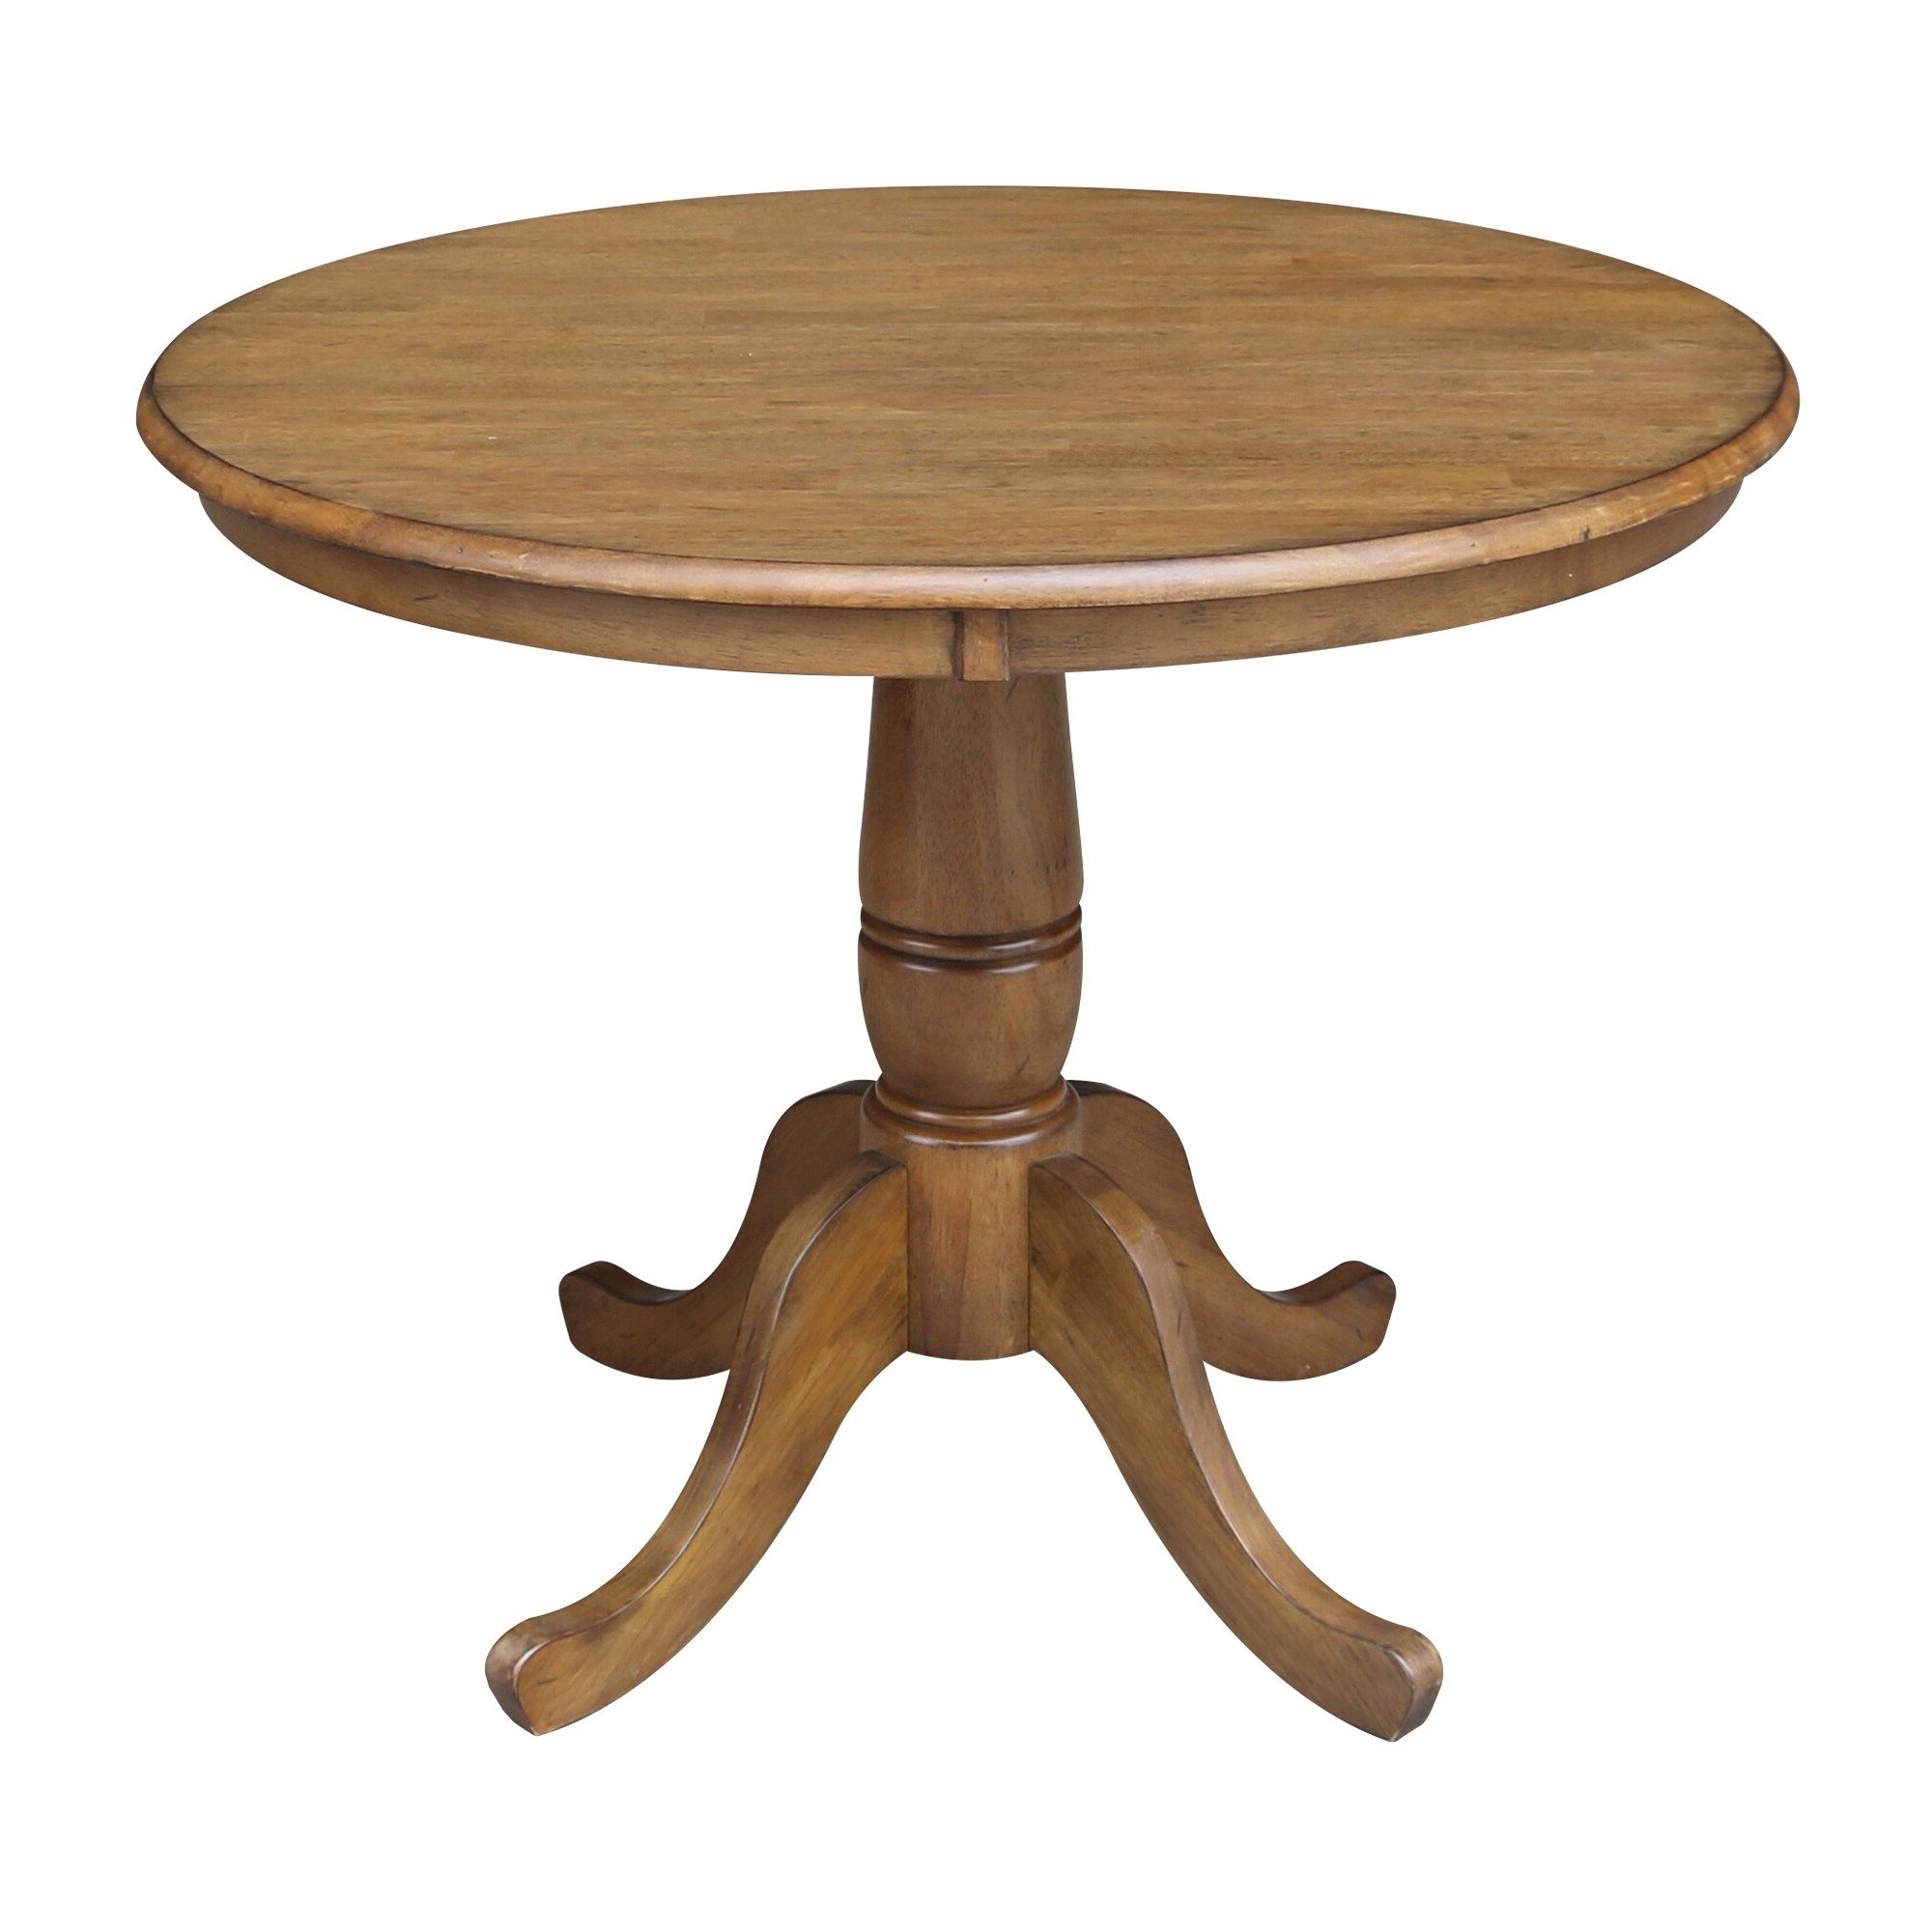 36" Round Top Pedestal Dining Table With 2 San Remo Chairs Regarding Well Known Bineau 35'' Pedestal Dining Tables (View 1 of 20)